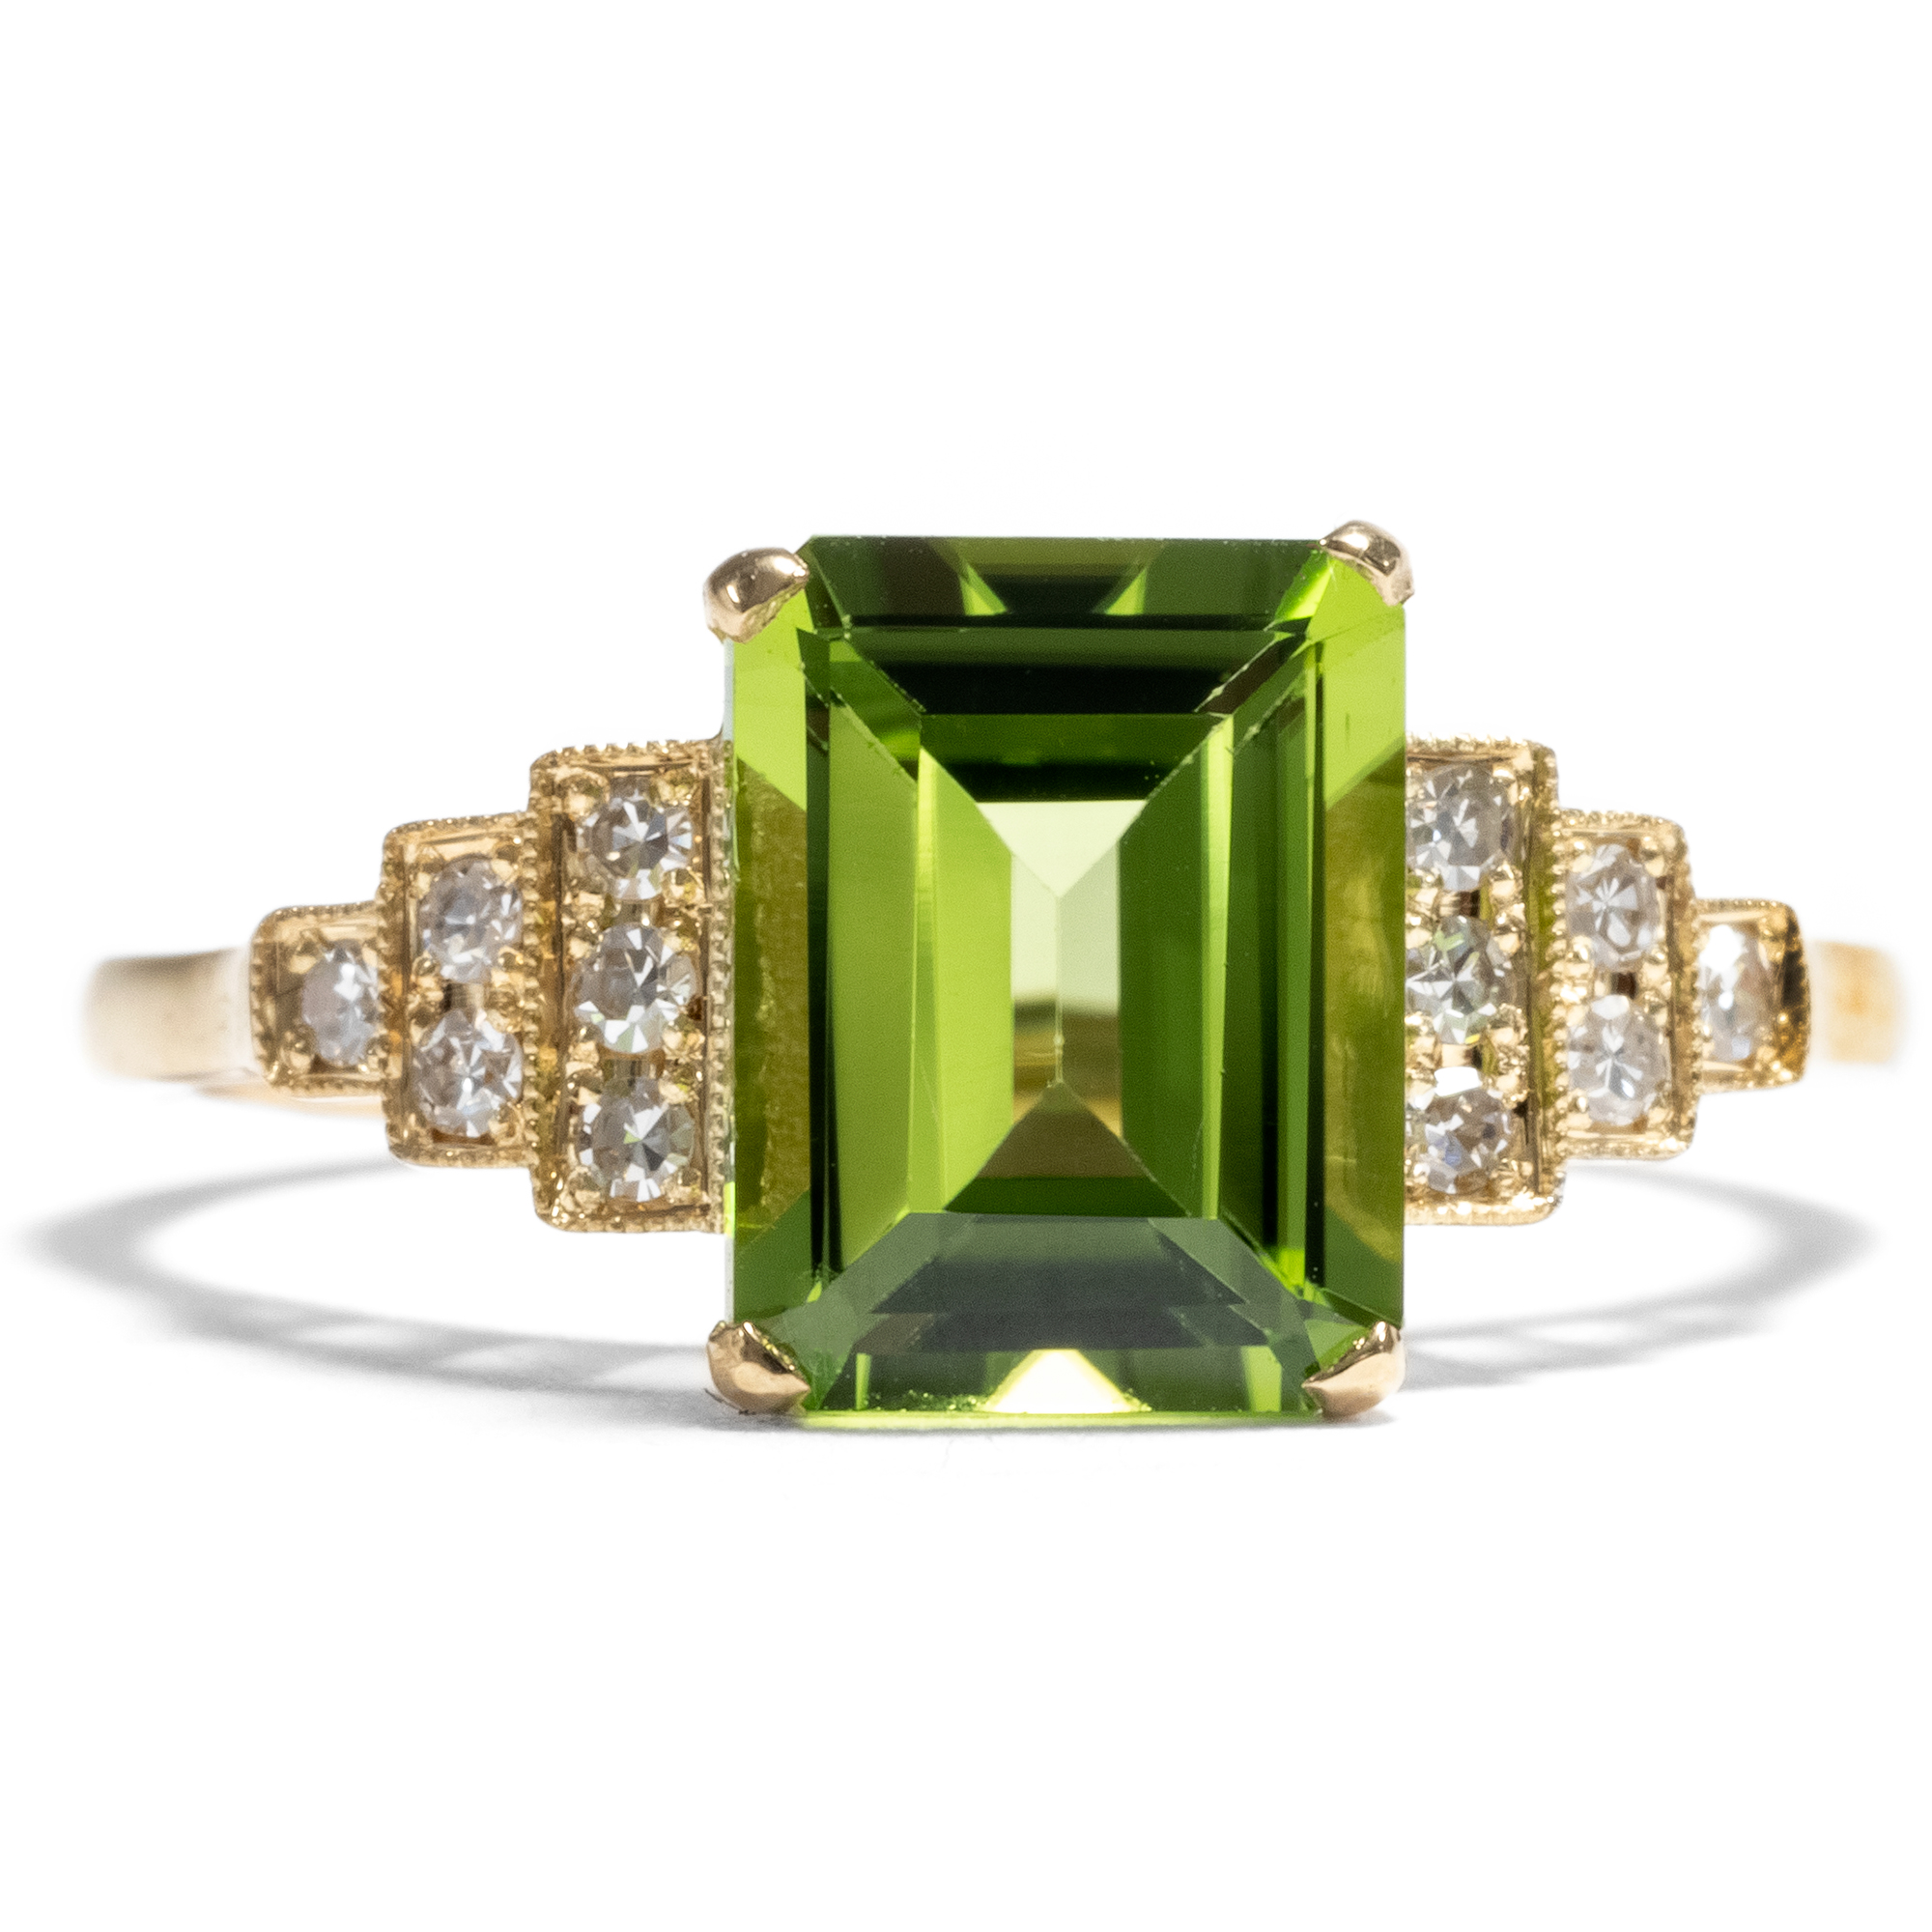 Unworn Gold Peridot and Diamond Ring From Our Workshop